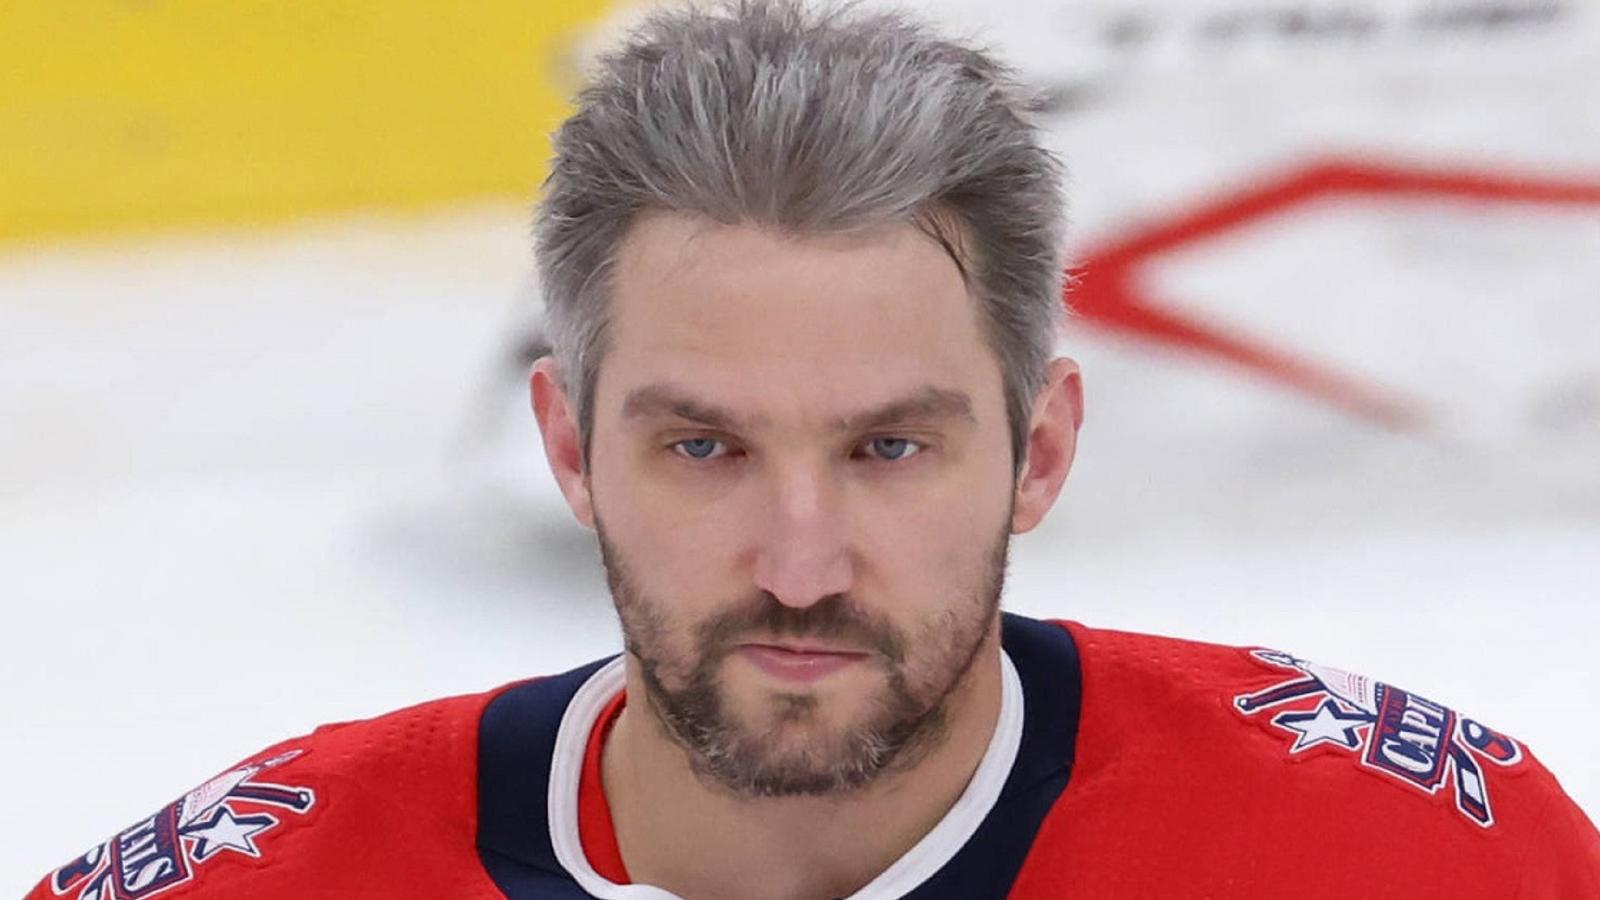 Alex Ovechkin shatters NHL record previously set by Gordie Howe.